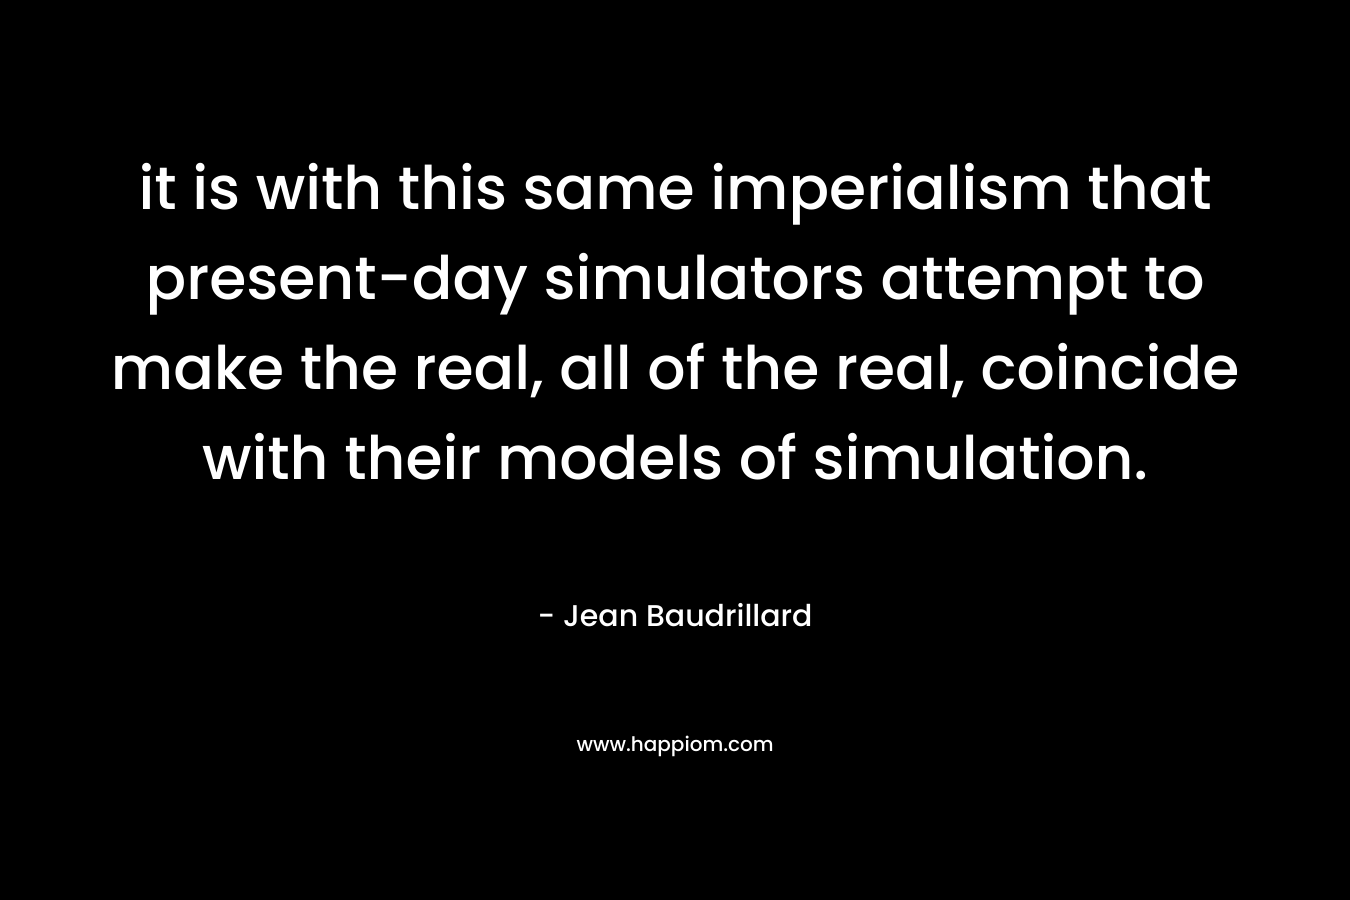 it is with this same imperialism that present-day simulators attempt to make the real, all of the real, coincide with their models of simulation. – Jean Baudrillard